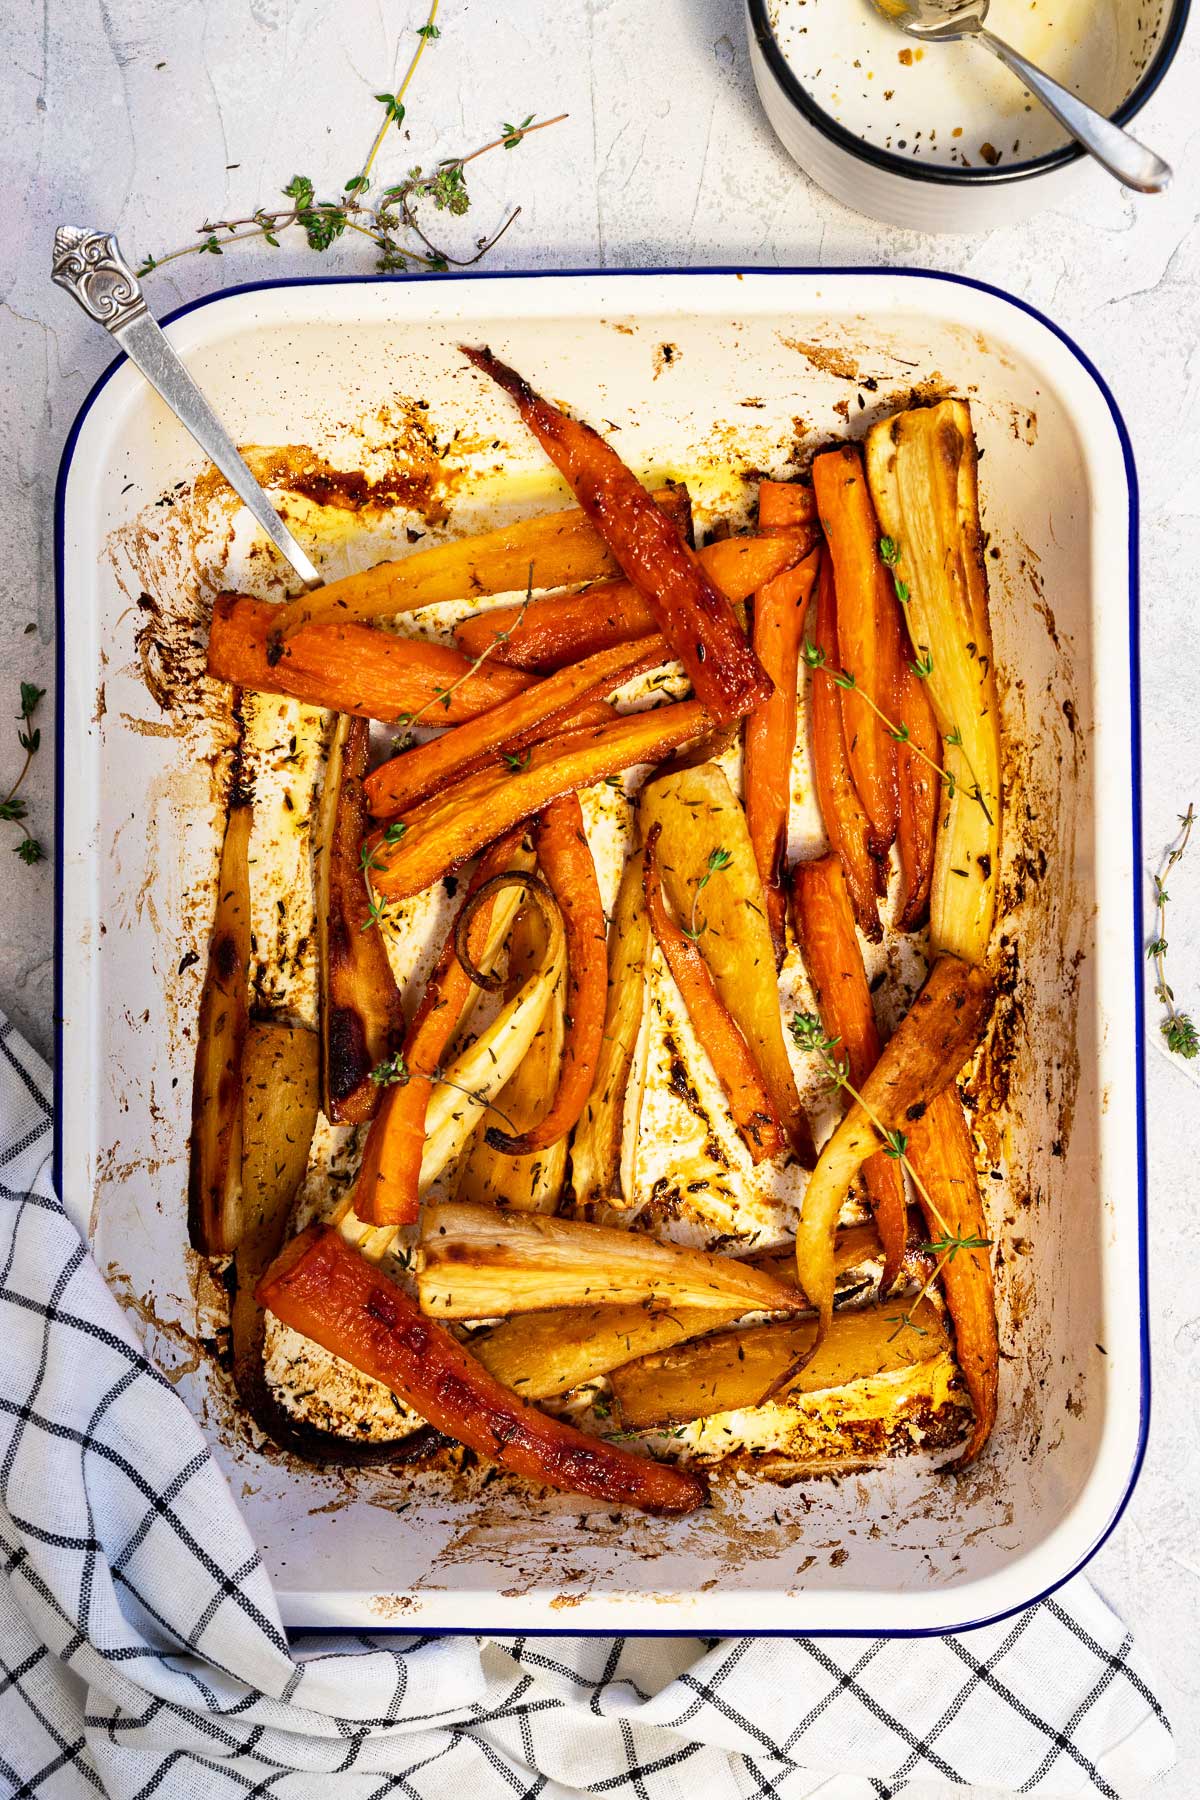 Honey roasted carrots and parsnips with thyme photographed overhead with a black and white checked tea towel in front and fresh thyme at the top, all on a textured white backgrounde.